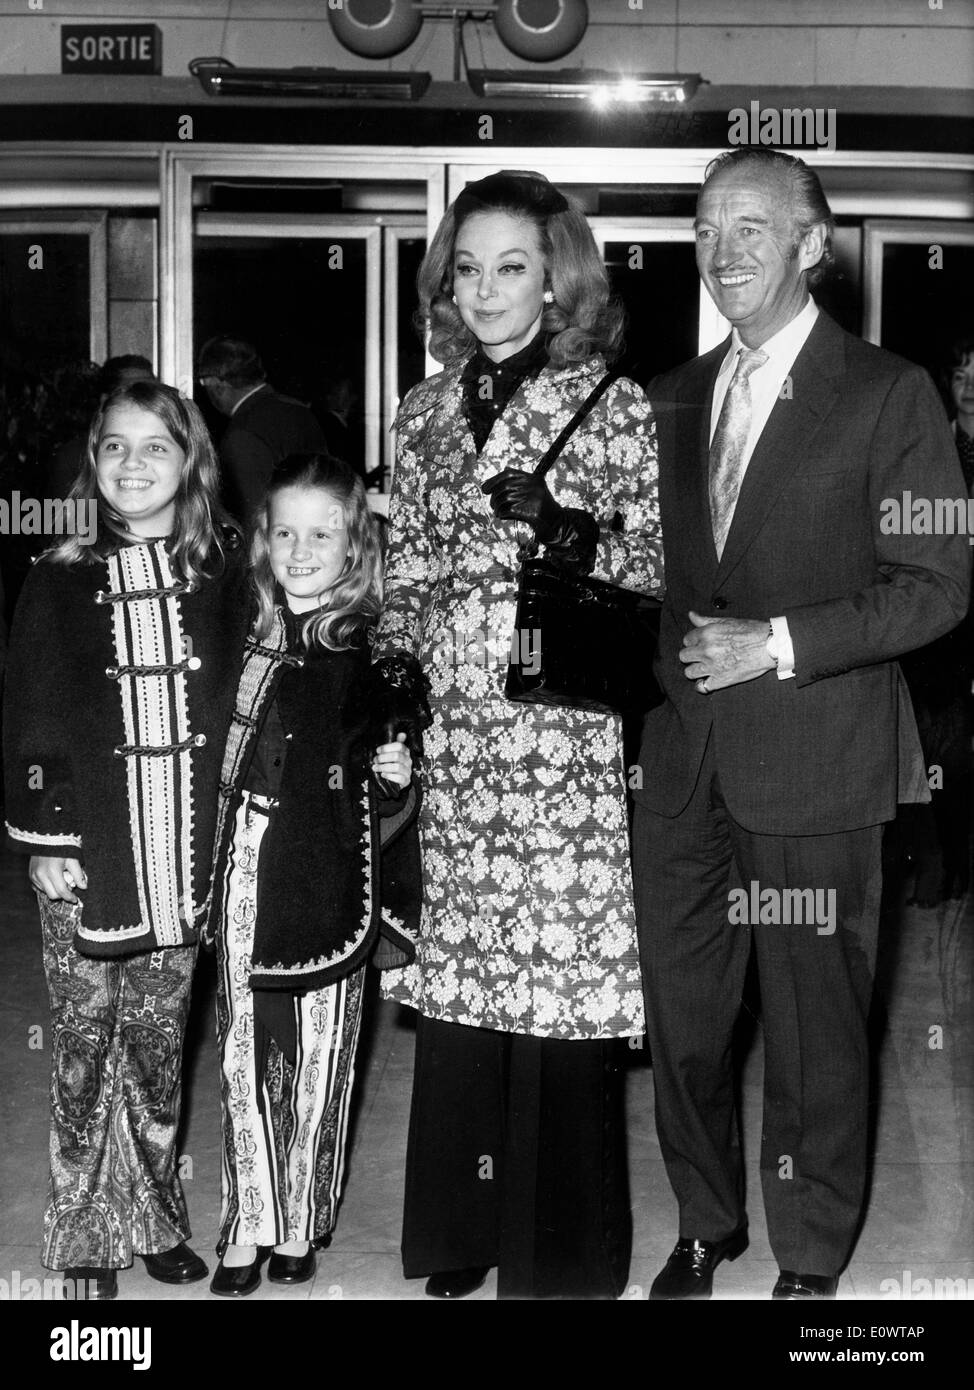 Actor David Niven with his family at a film premiere Stock Photo